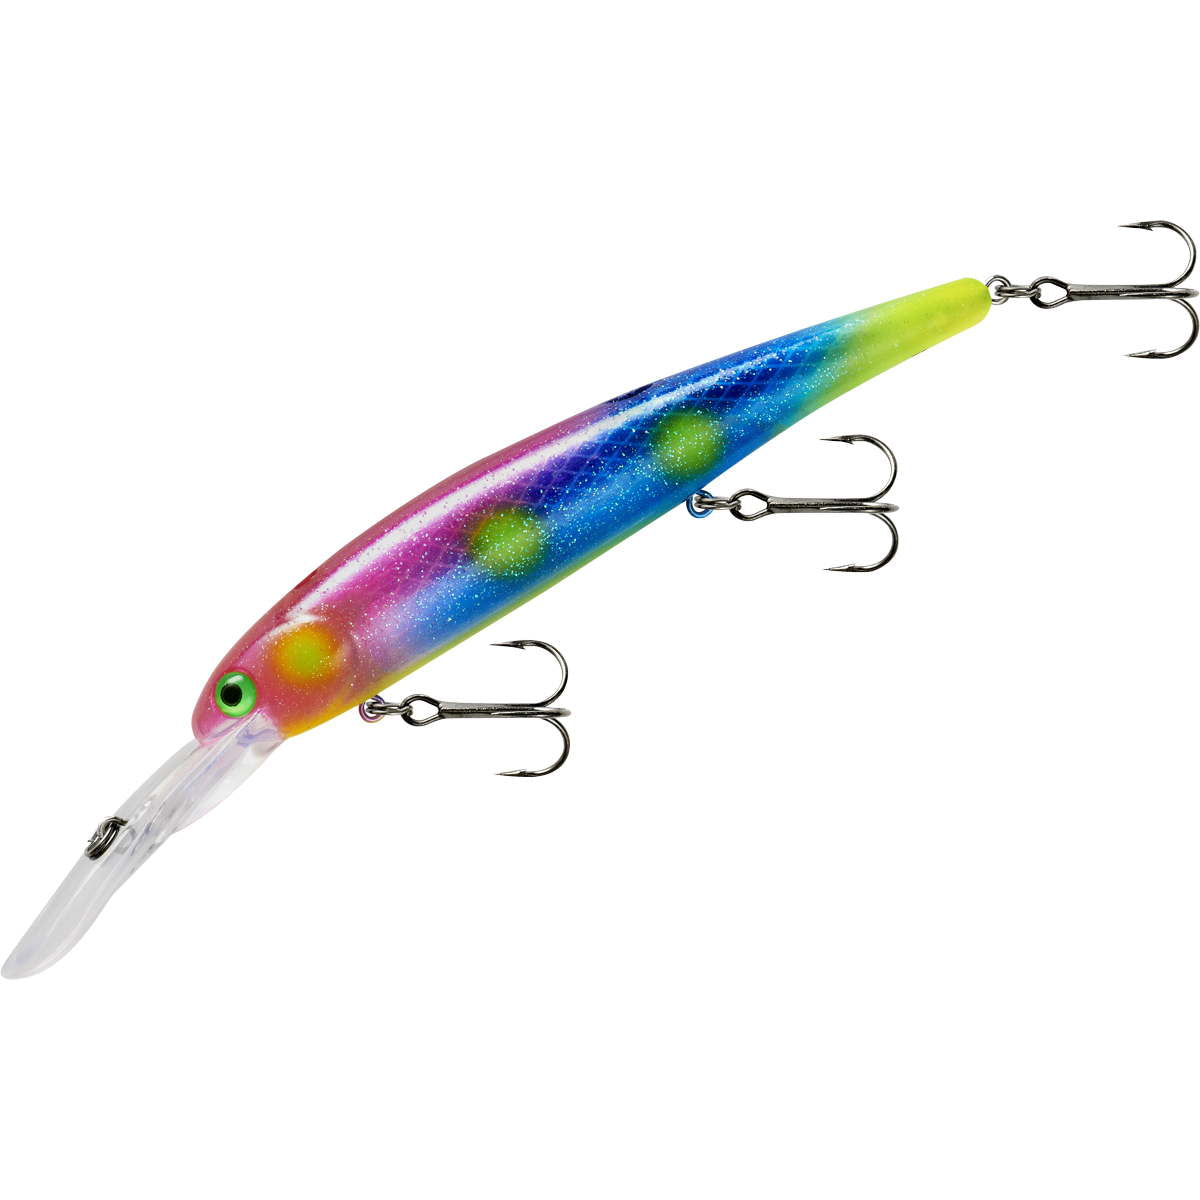 Photo of Bandit Lures Generator for sale at United Tackle Shops.